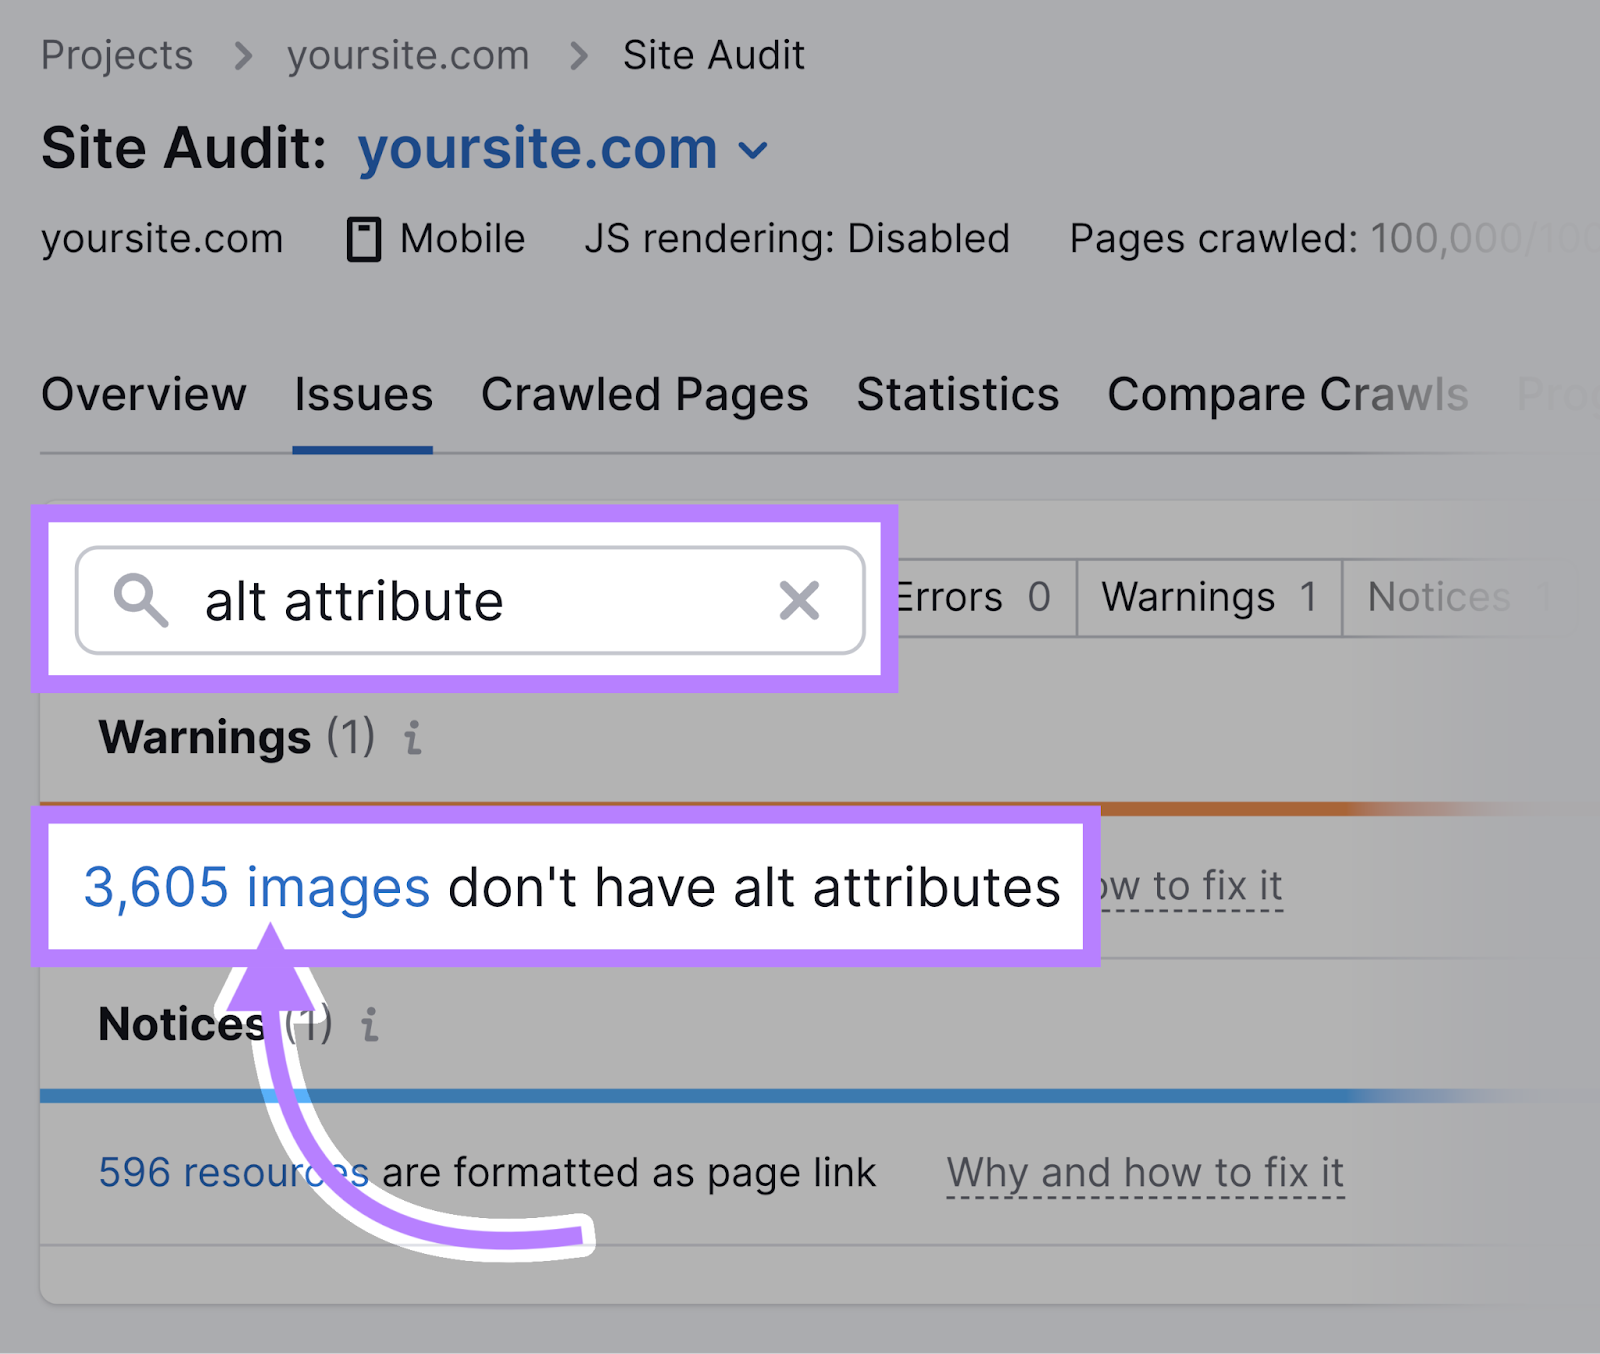 search for "alt attribute" in the "Issues" section of Site Audit found 3,605 images wit،ut alt attribute